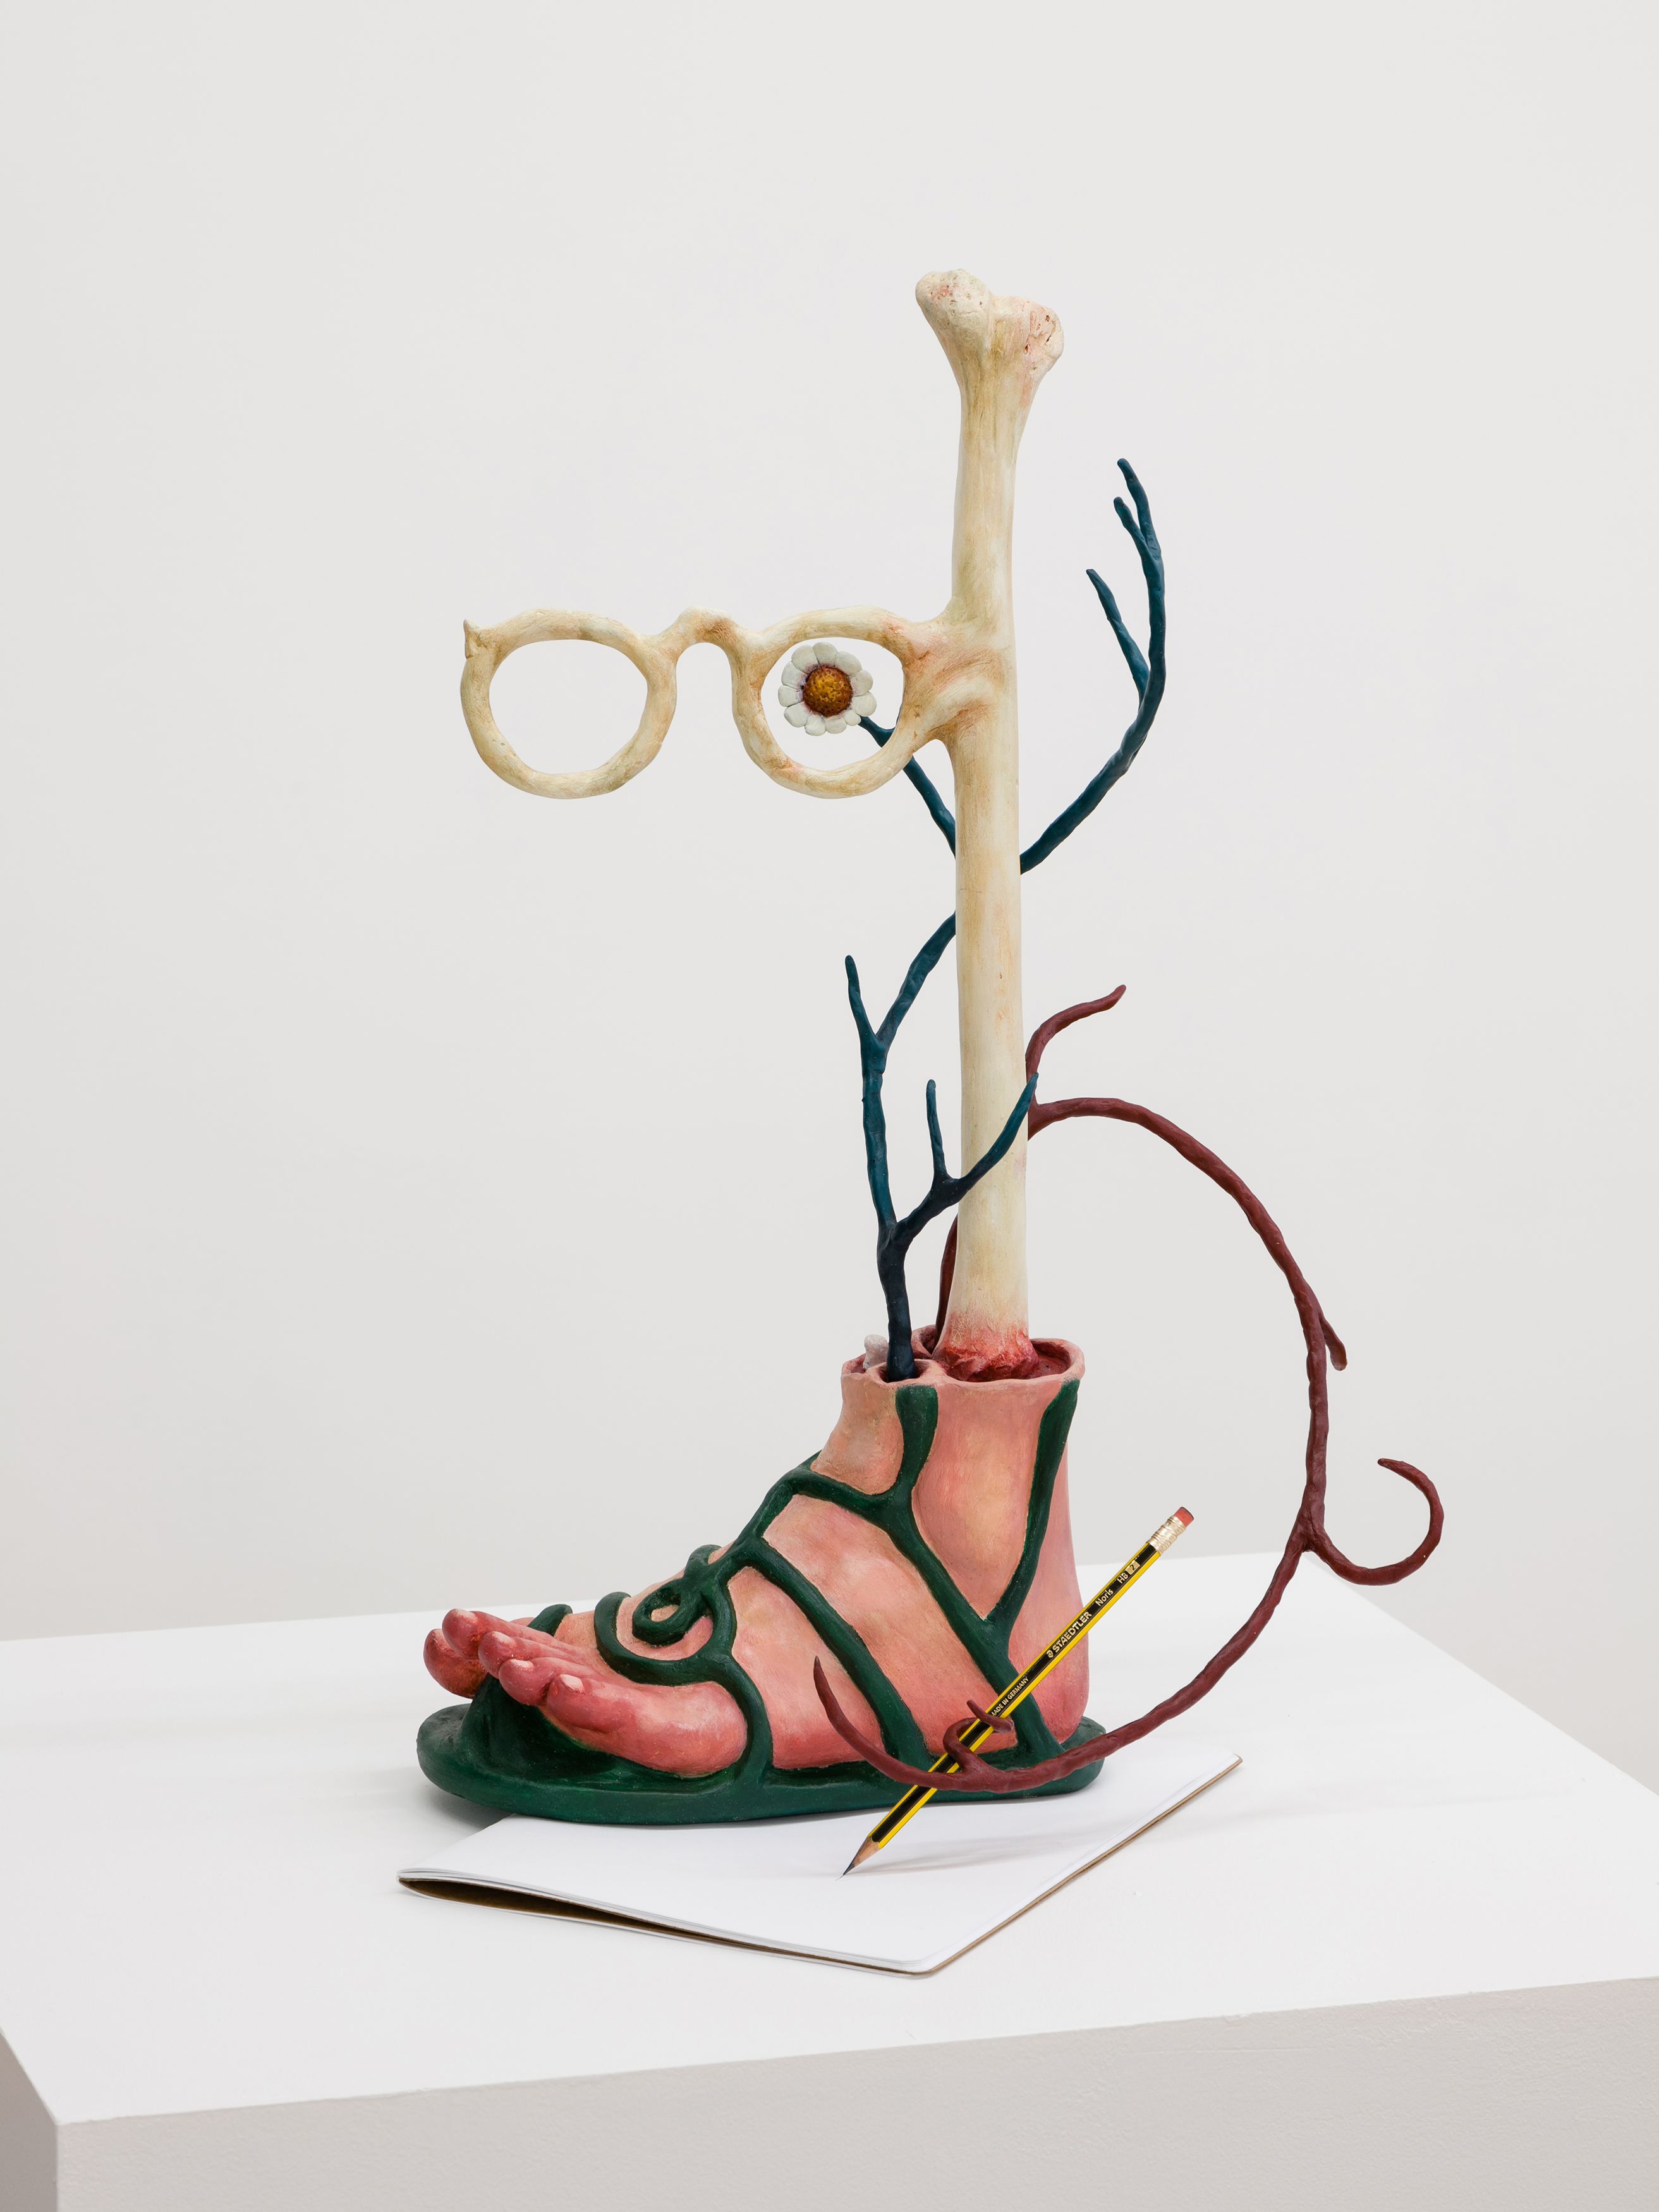 Justin Fitzpatrick, Vehicle no 1: The White Glasses, 2019, resin, epoxy clay, metal, pencil, paper, 23 1/4 x 11 3/4 x 11 3/4 in. (59 x 30 x 30 cm)